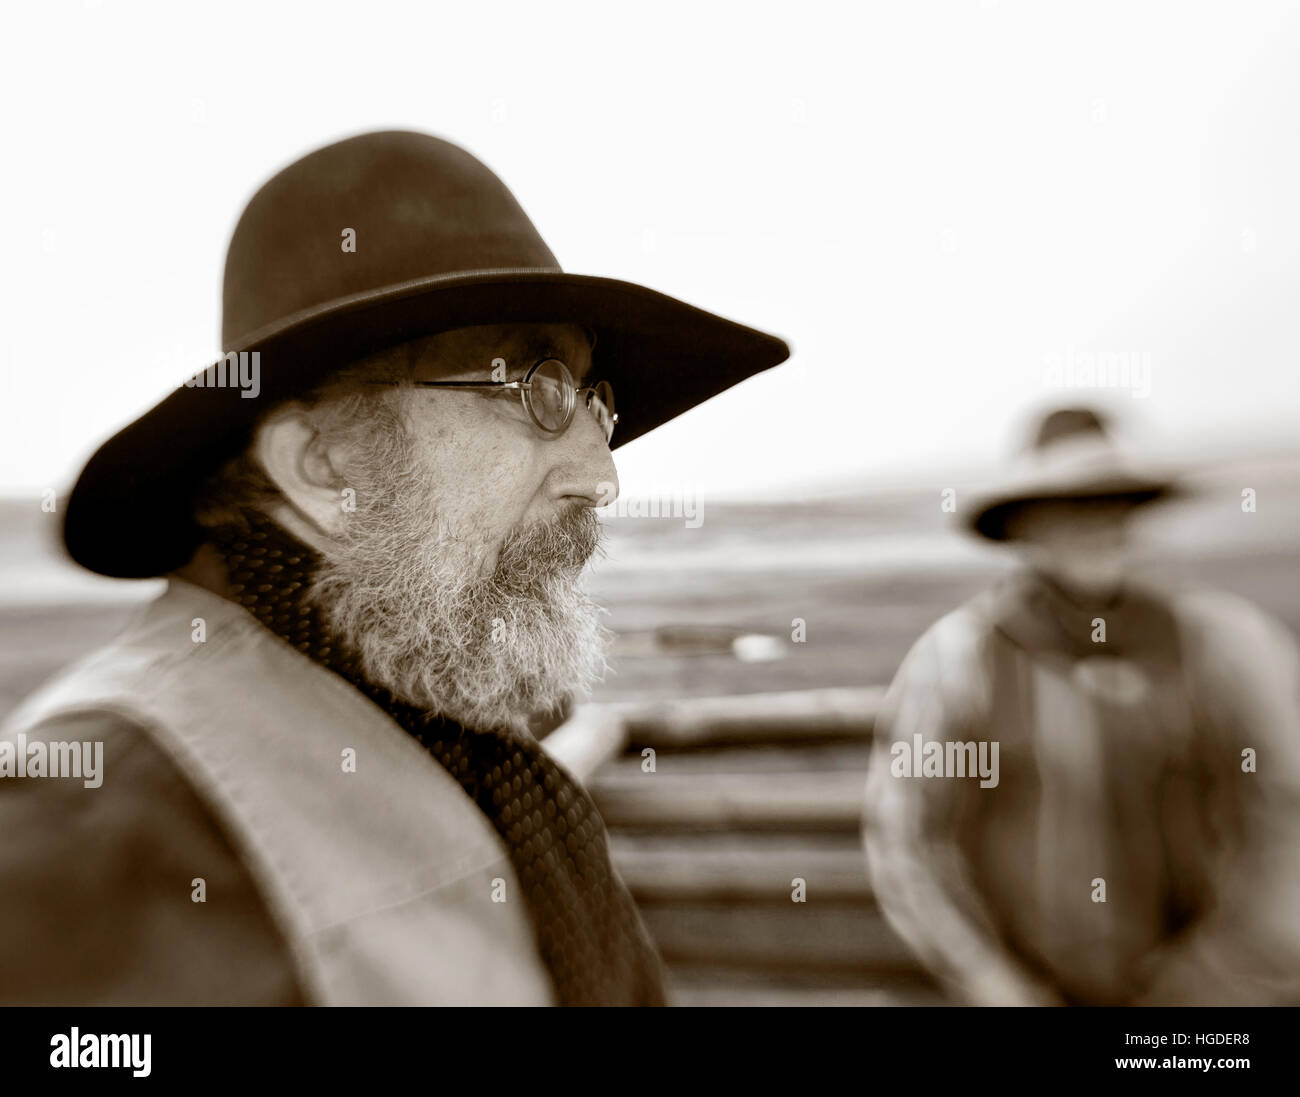 Cowboy with beard Black and White Stock Photos & Images - Alamy